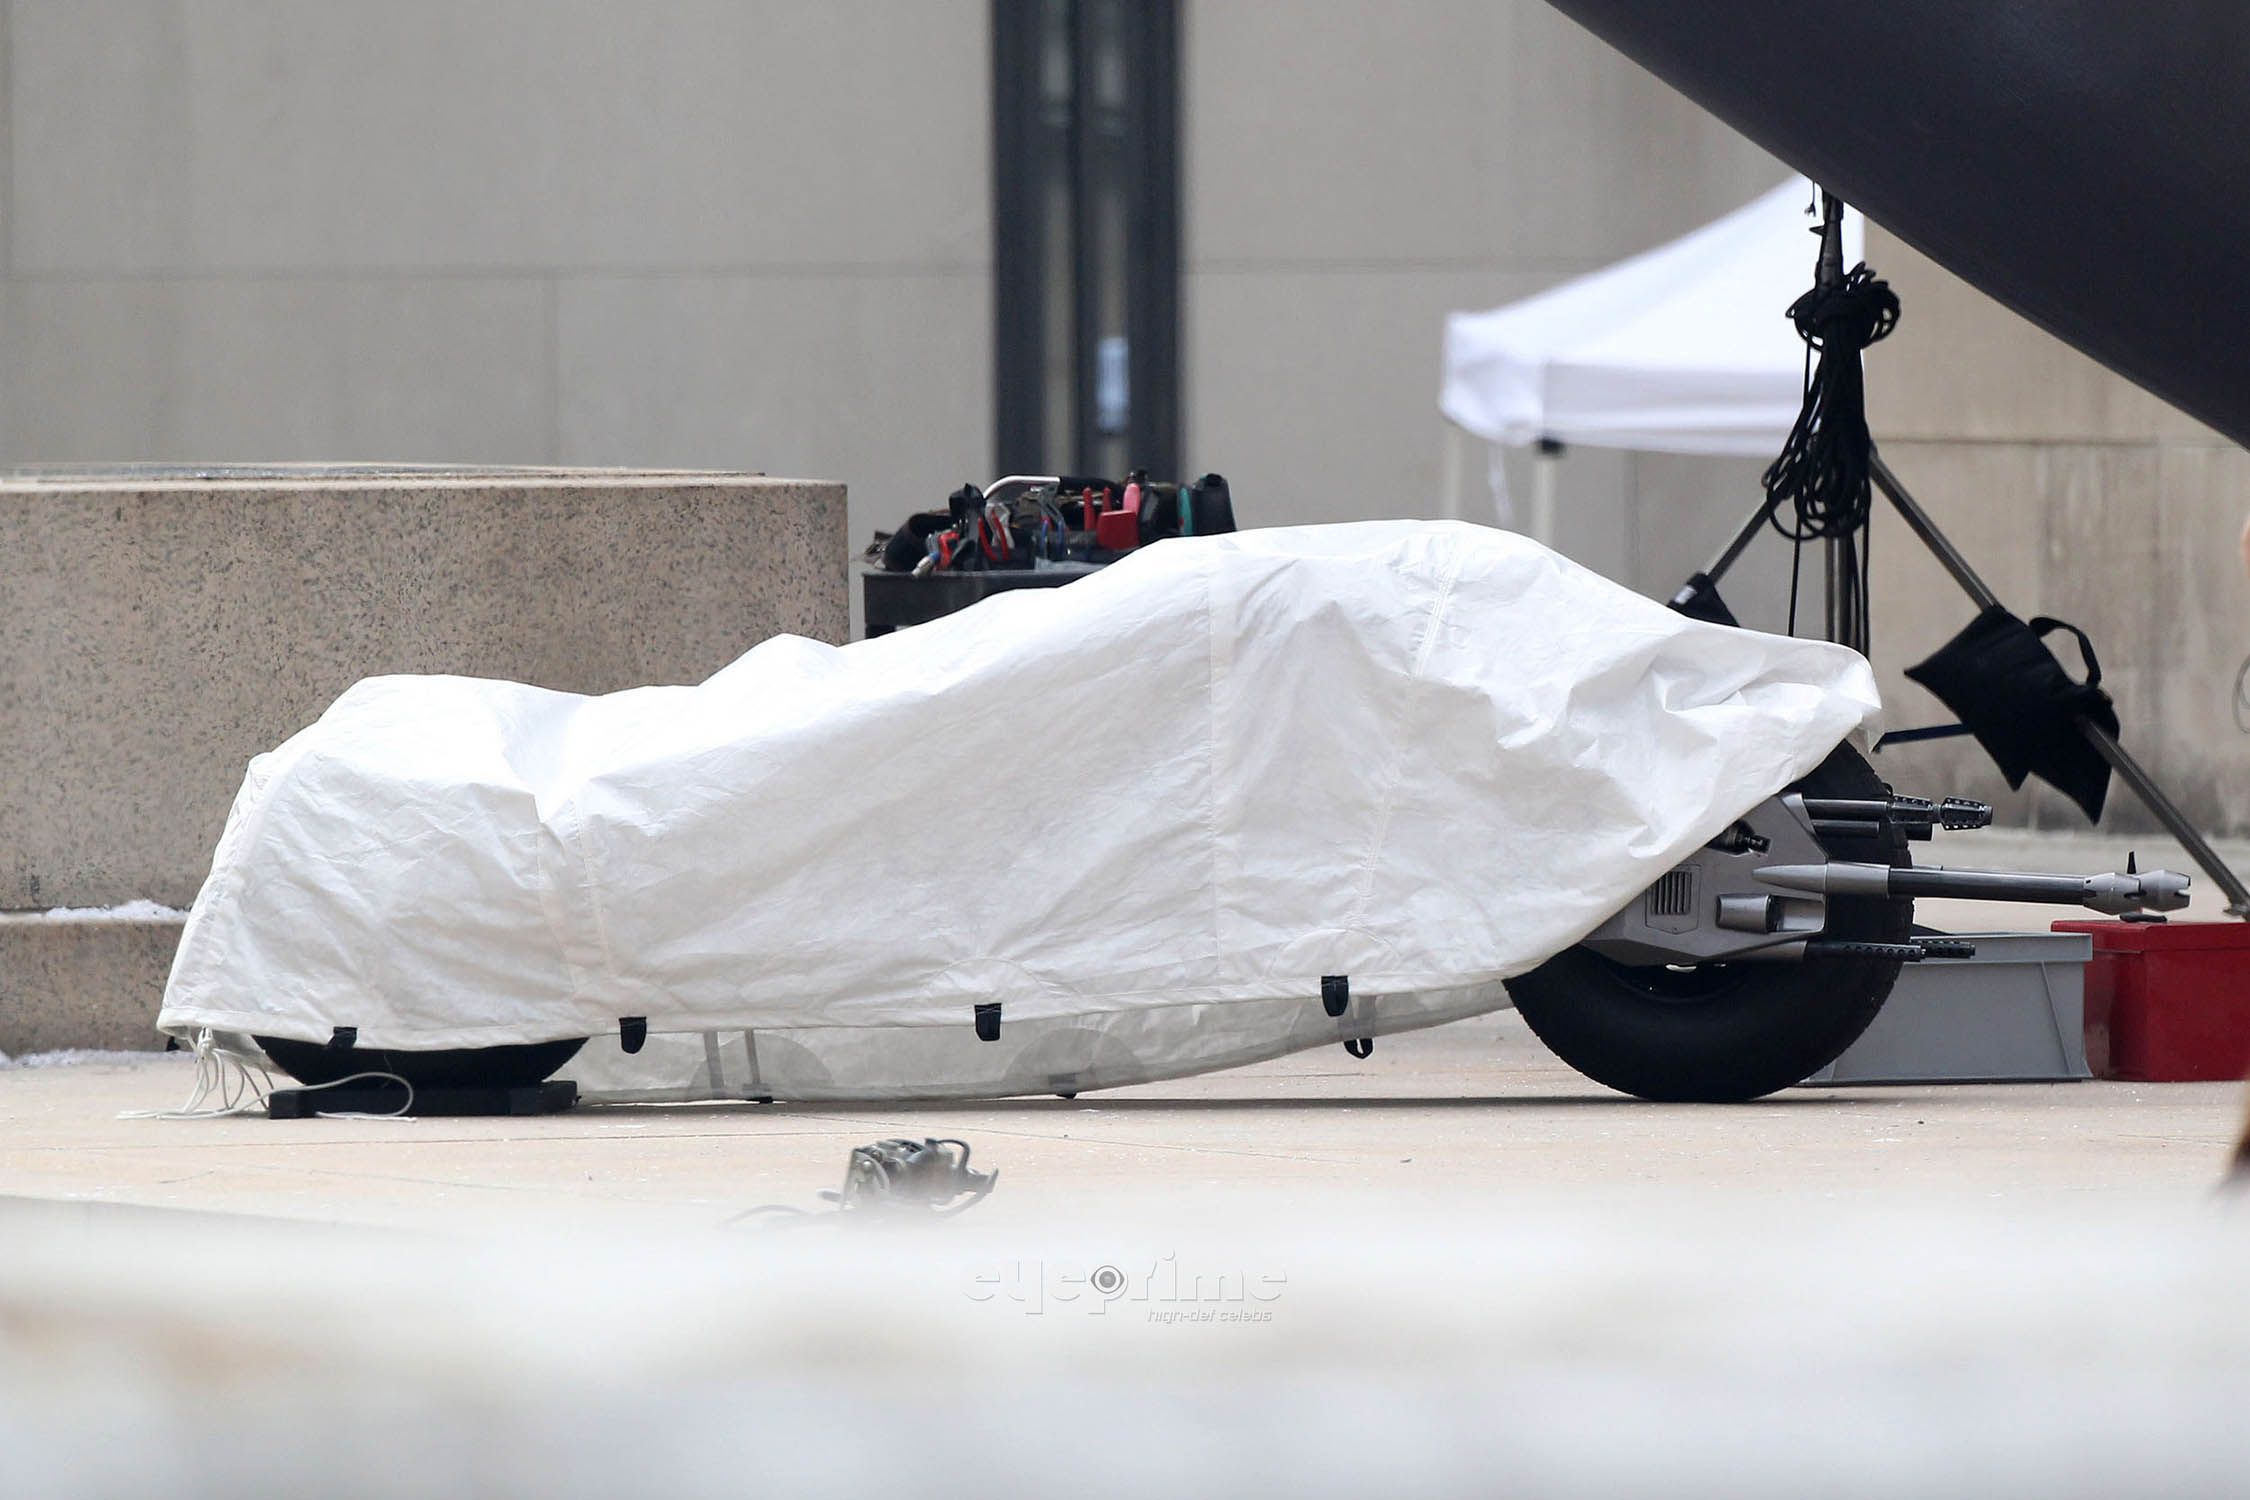 Covered Batpod on the The Dark Knight Rises Set